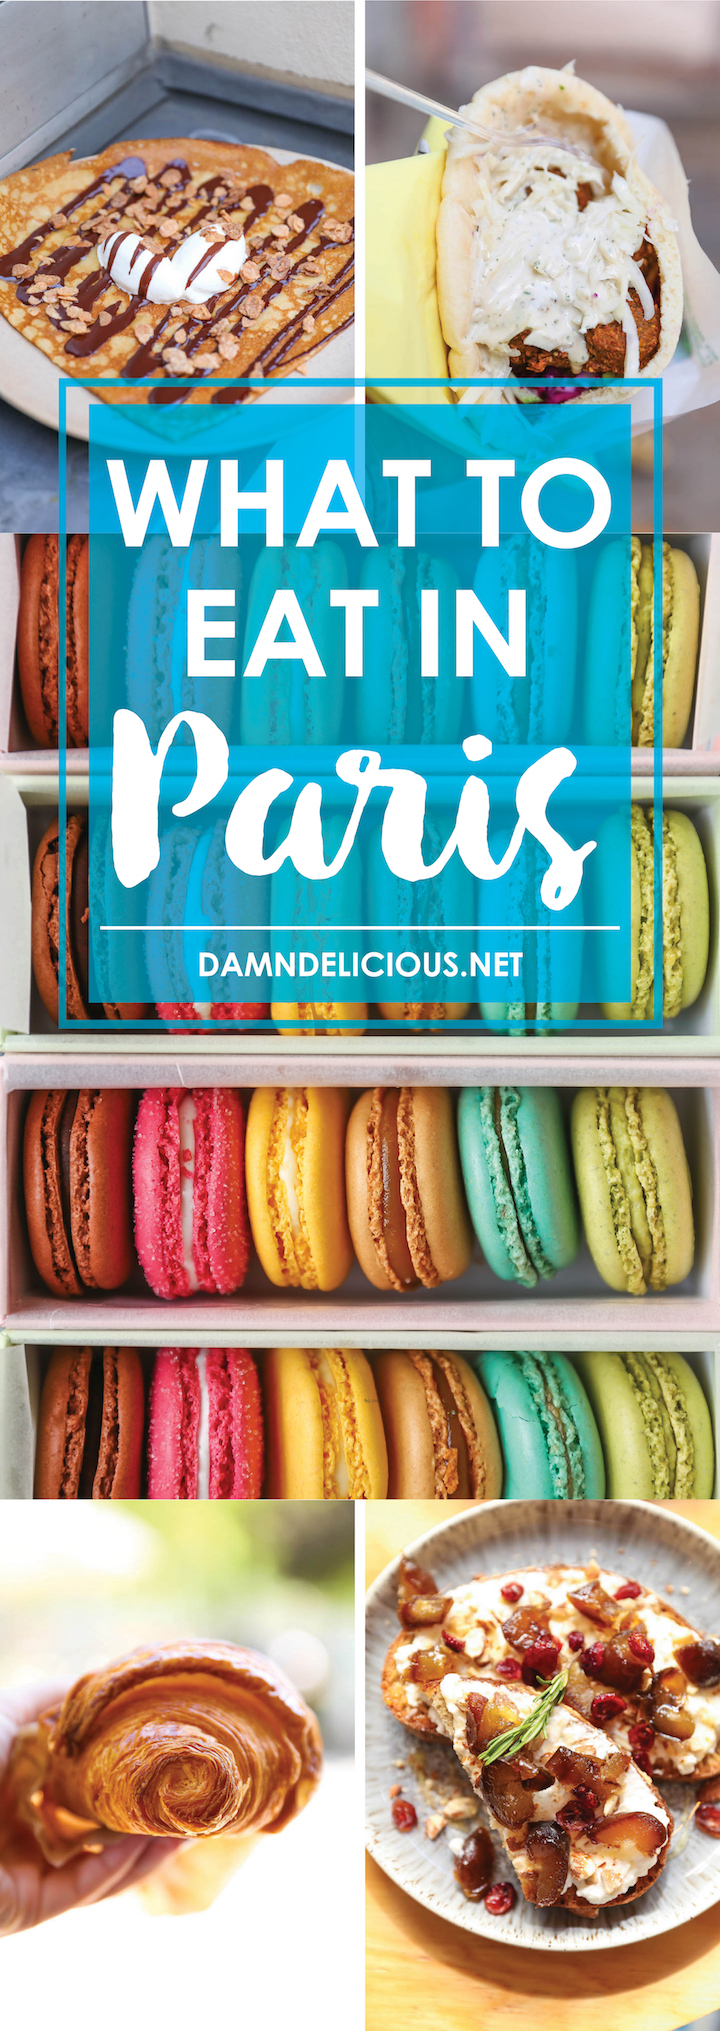 What to Eat in Paris - Damn Delicious